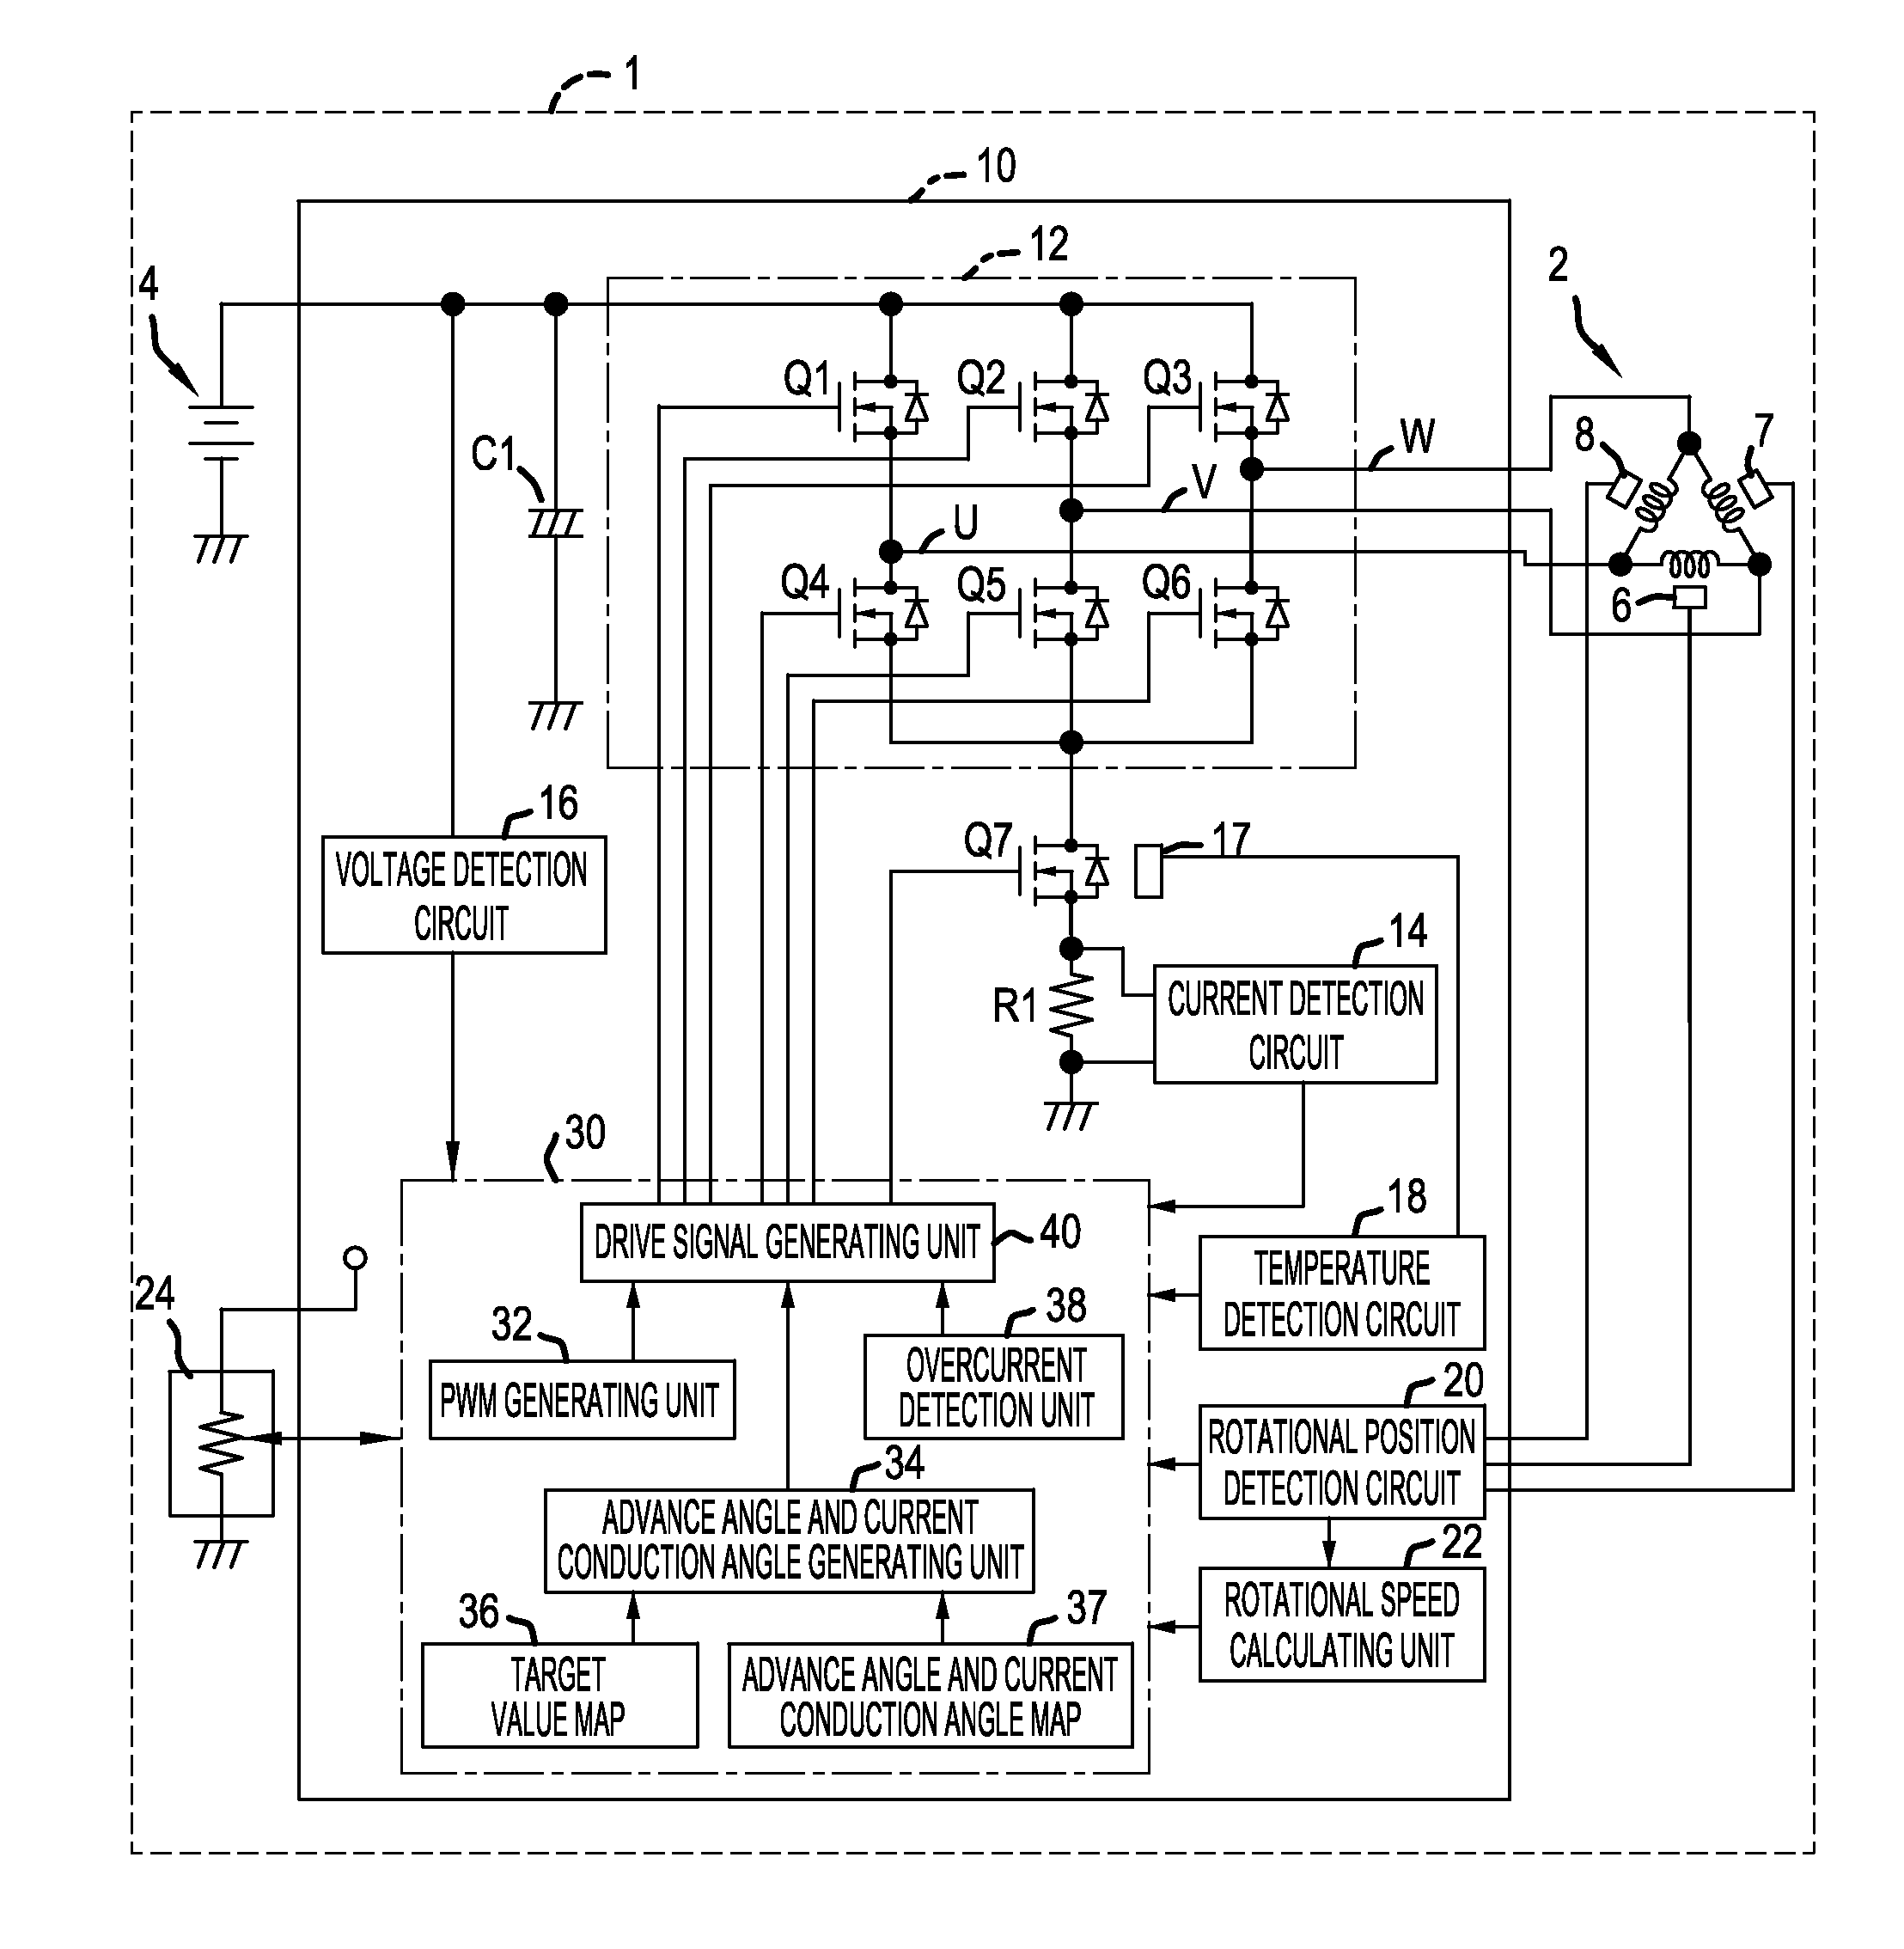 Power tool having a brushless motor and a control unit for controlling the brushless motor